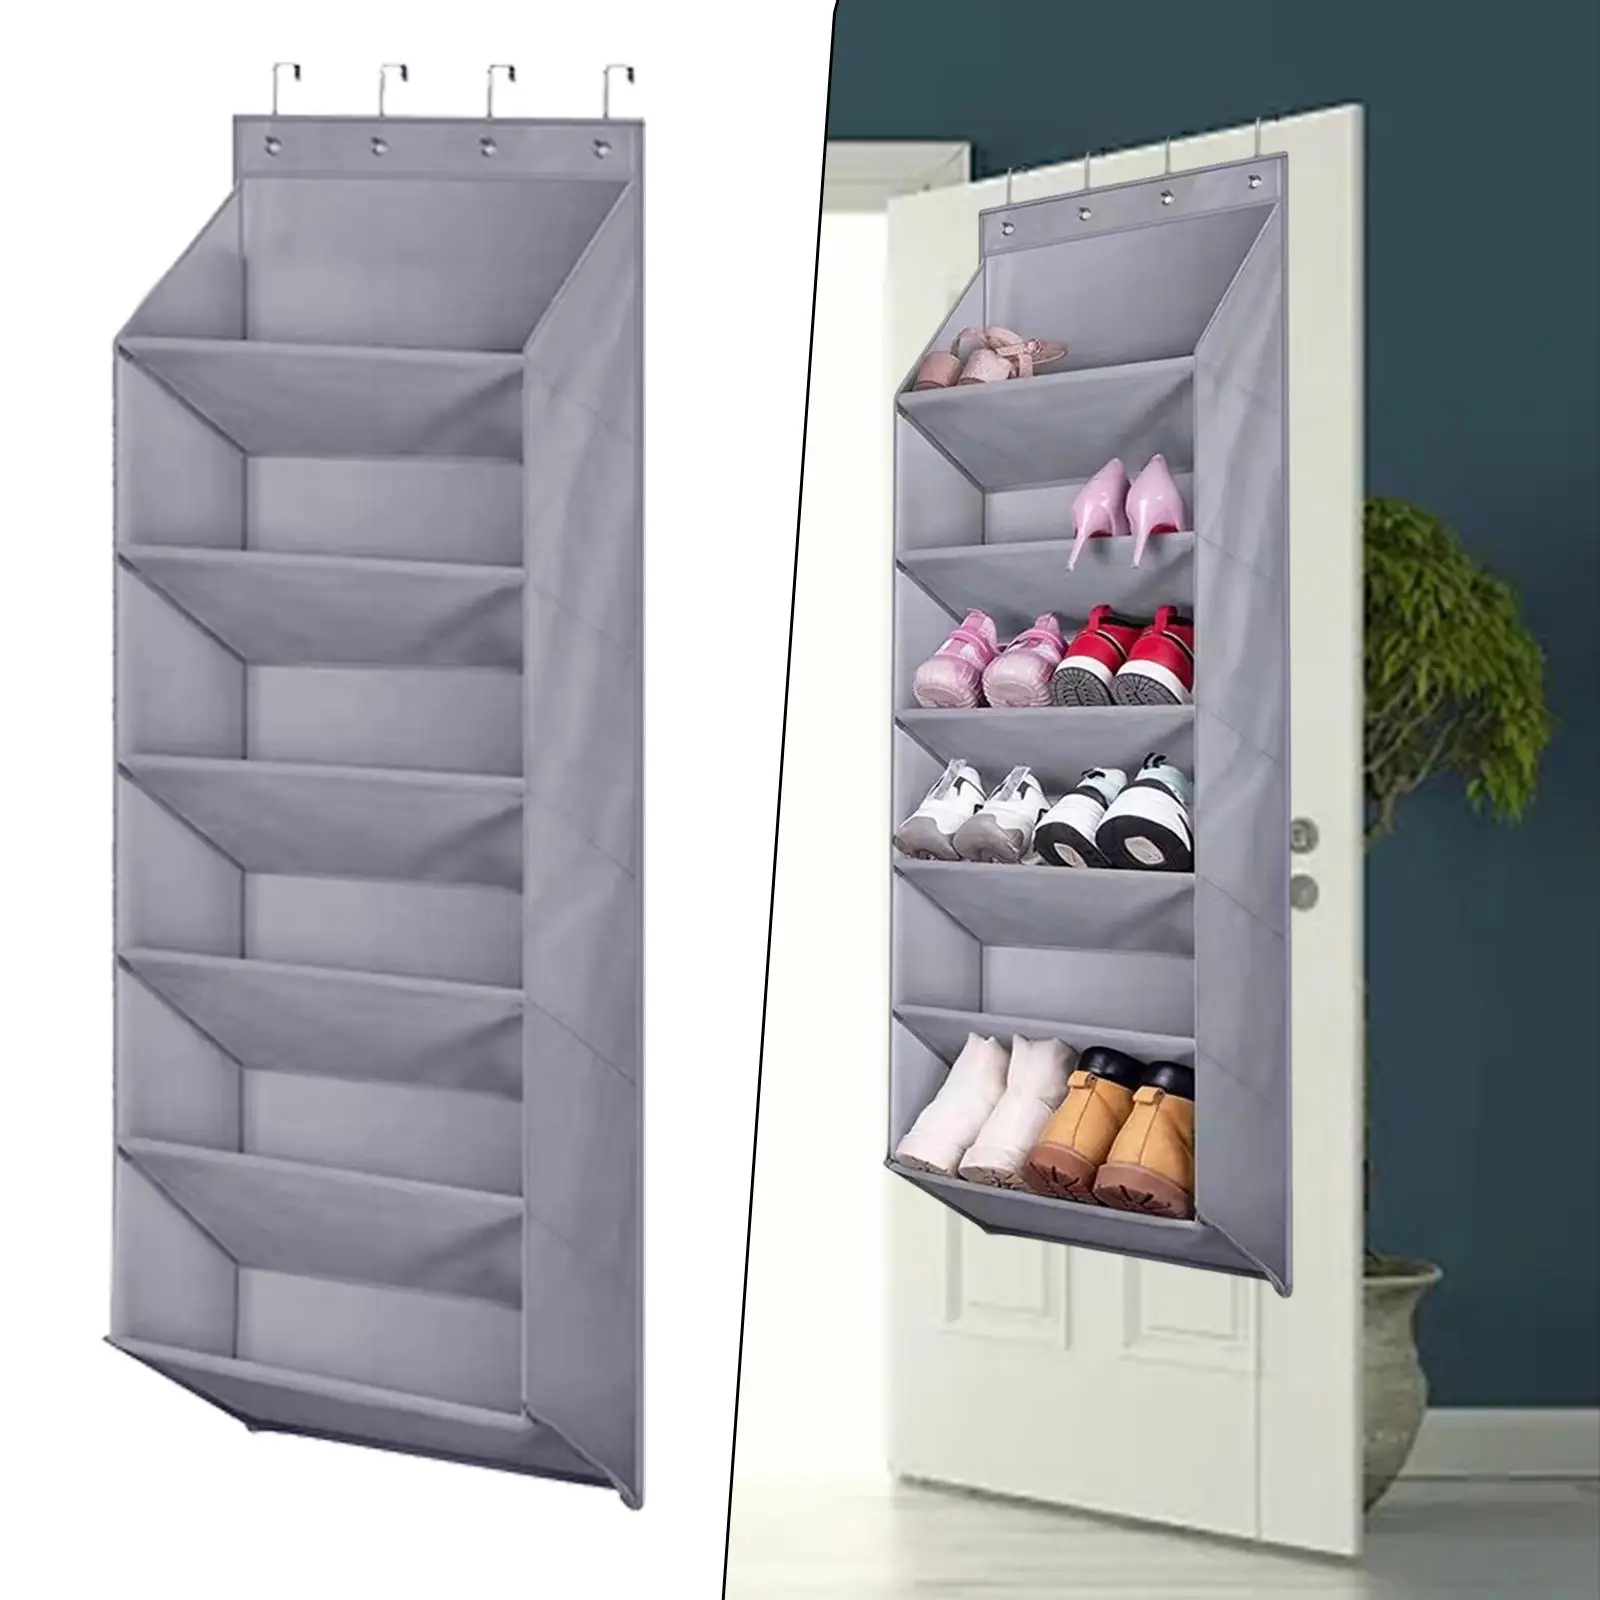 Door Shoe Rack Gray Multifunctional Oxford Cloth Various Compartments Foldable Hanging Storage Bag for Baby Items 14 Pair Boots